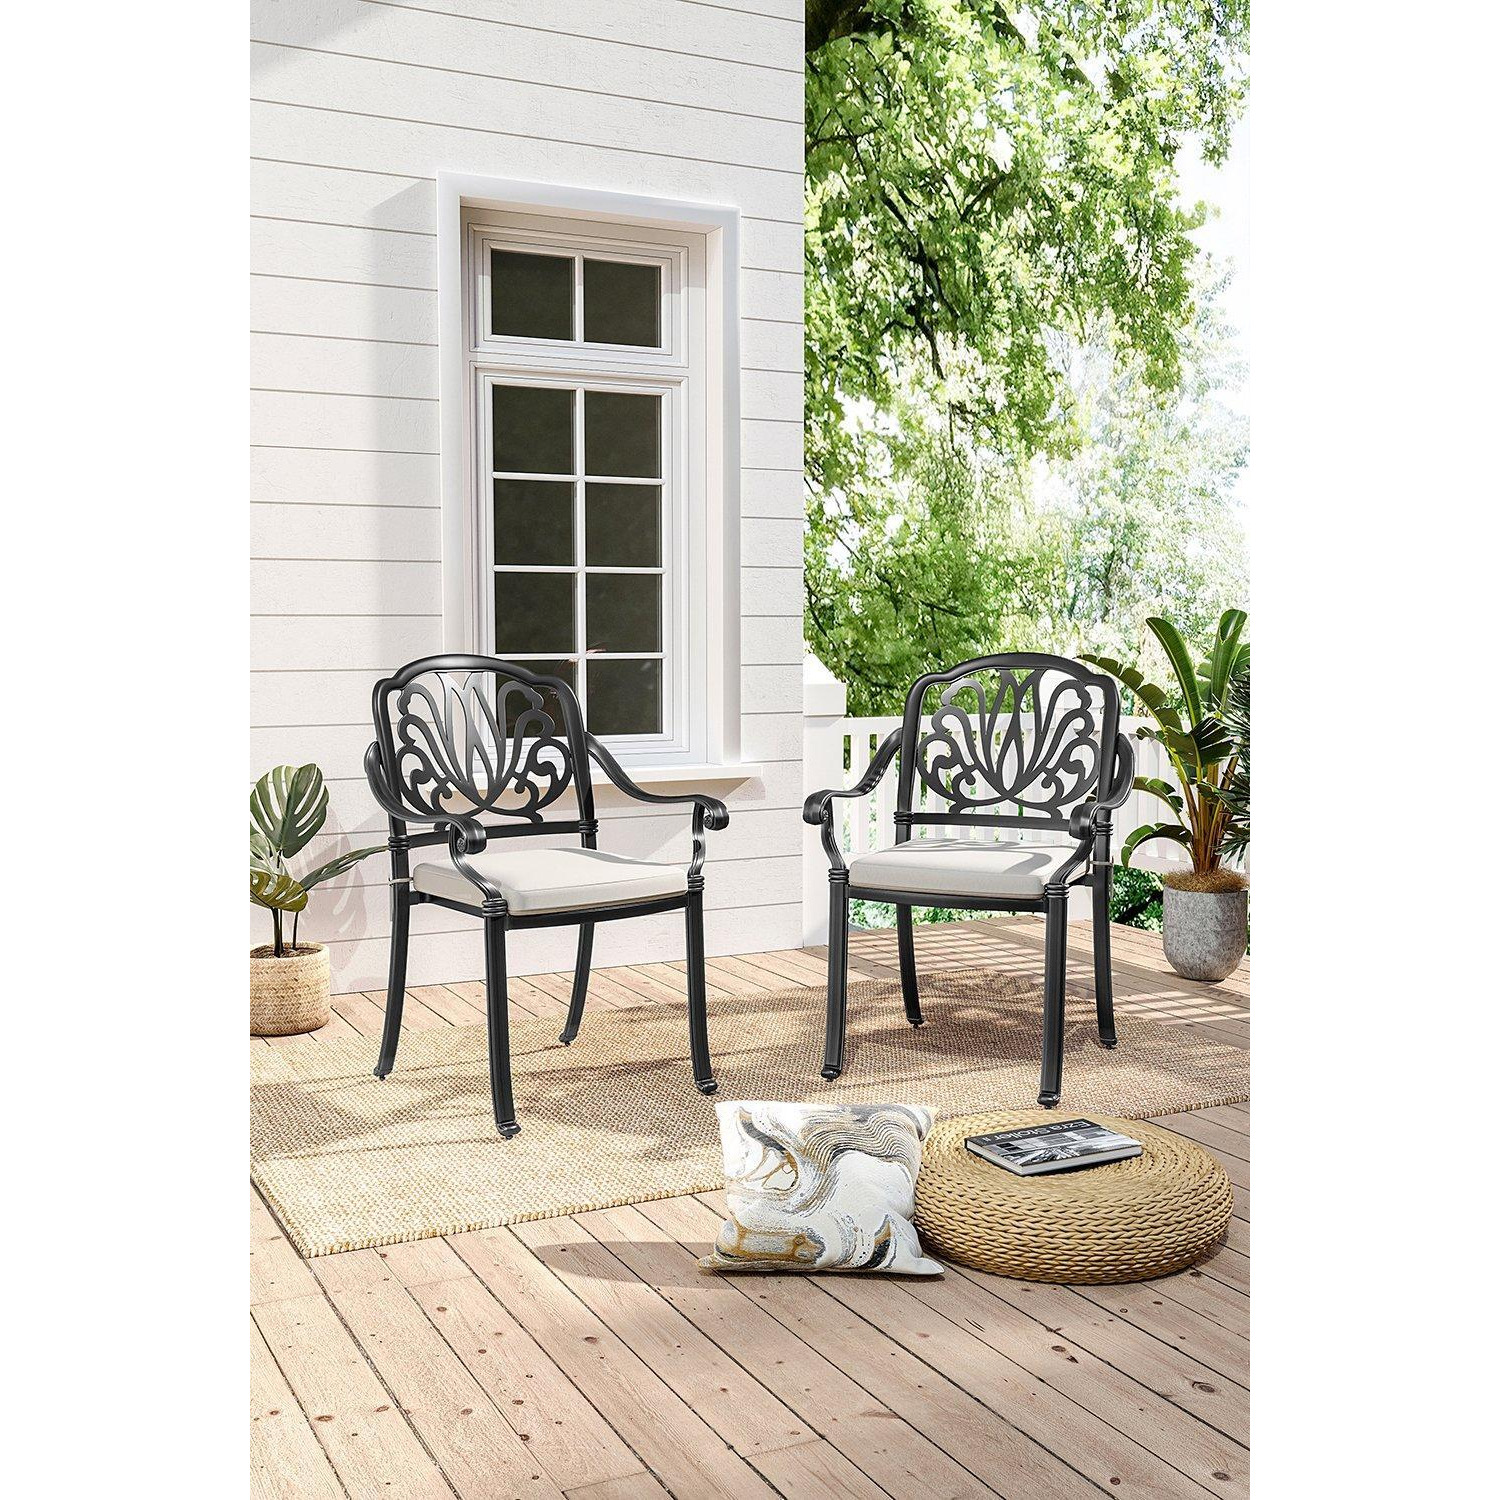 Set of 2 Outdoor Cast Aluminum Dining Chairs with Cushions - image 1